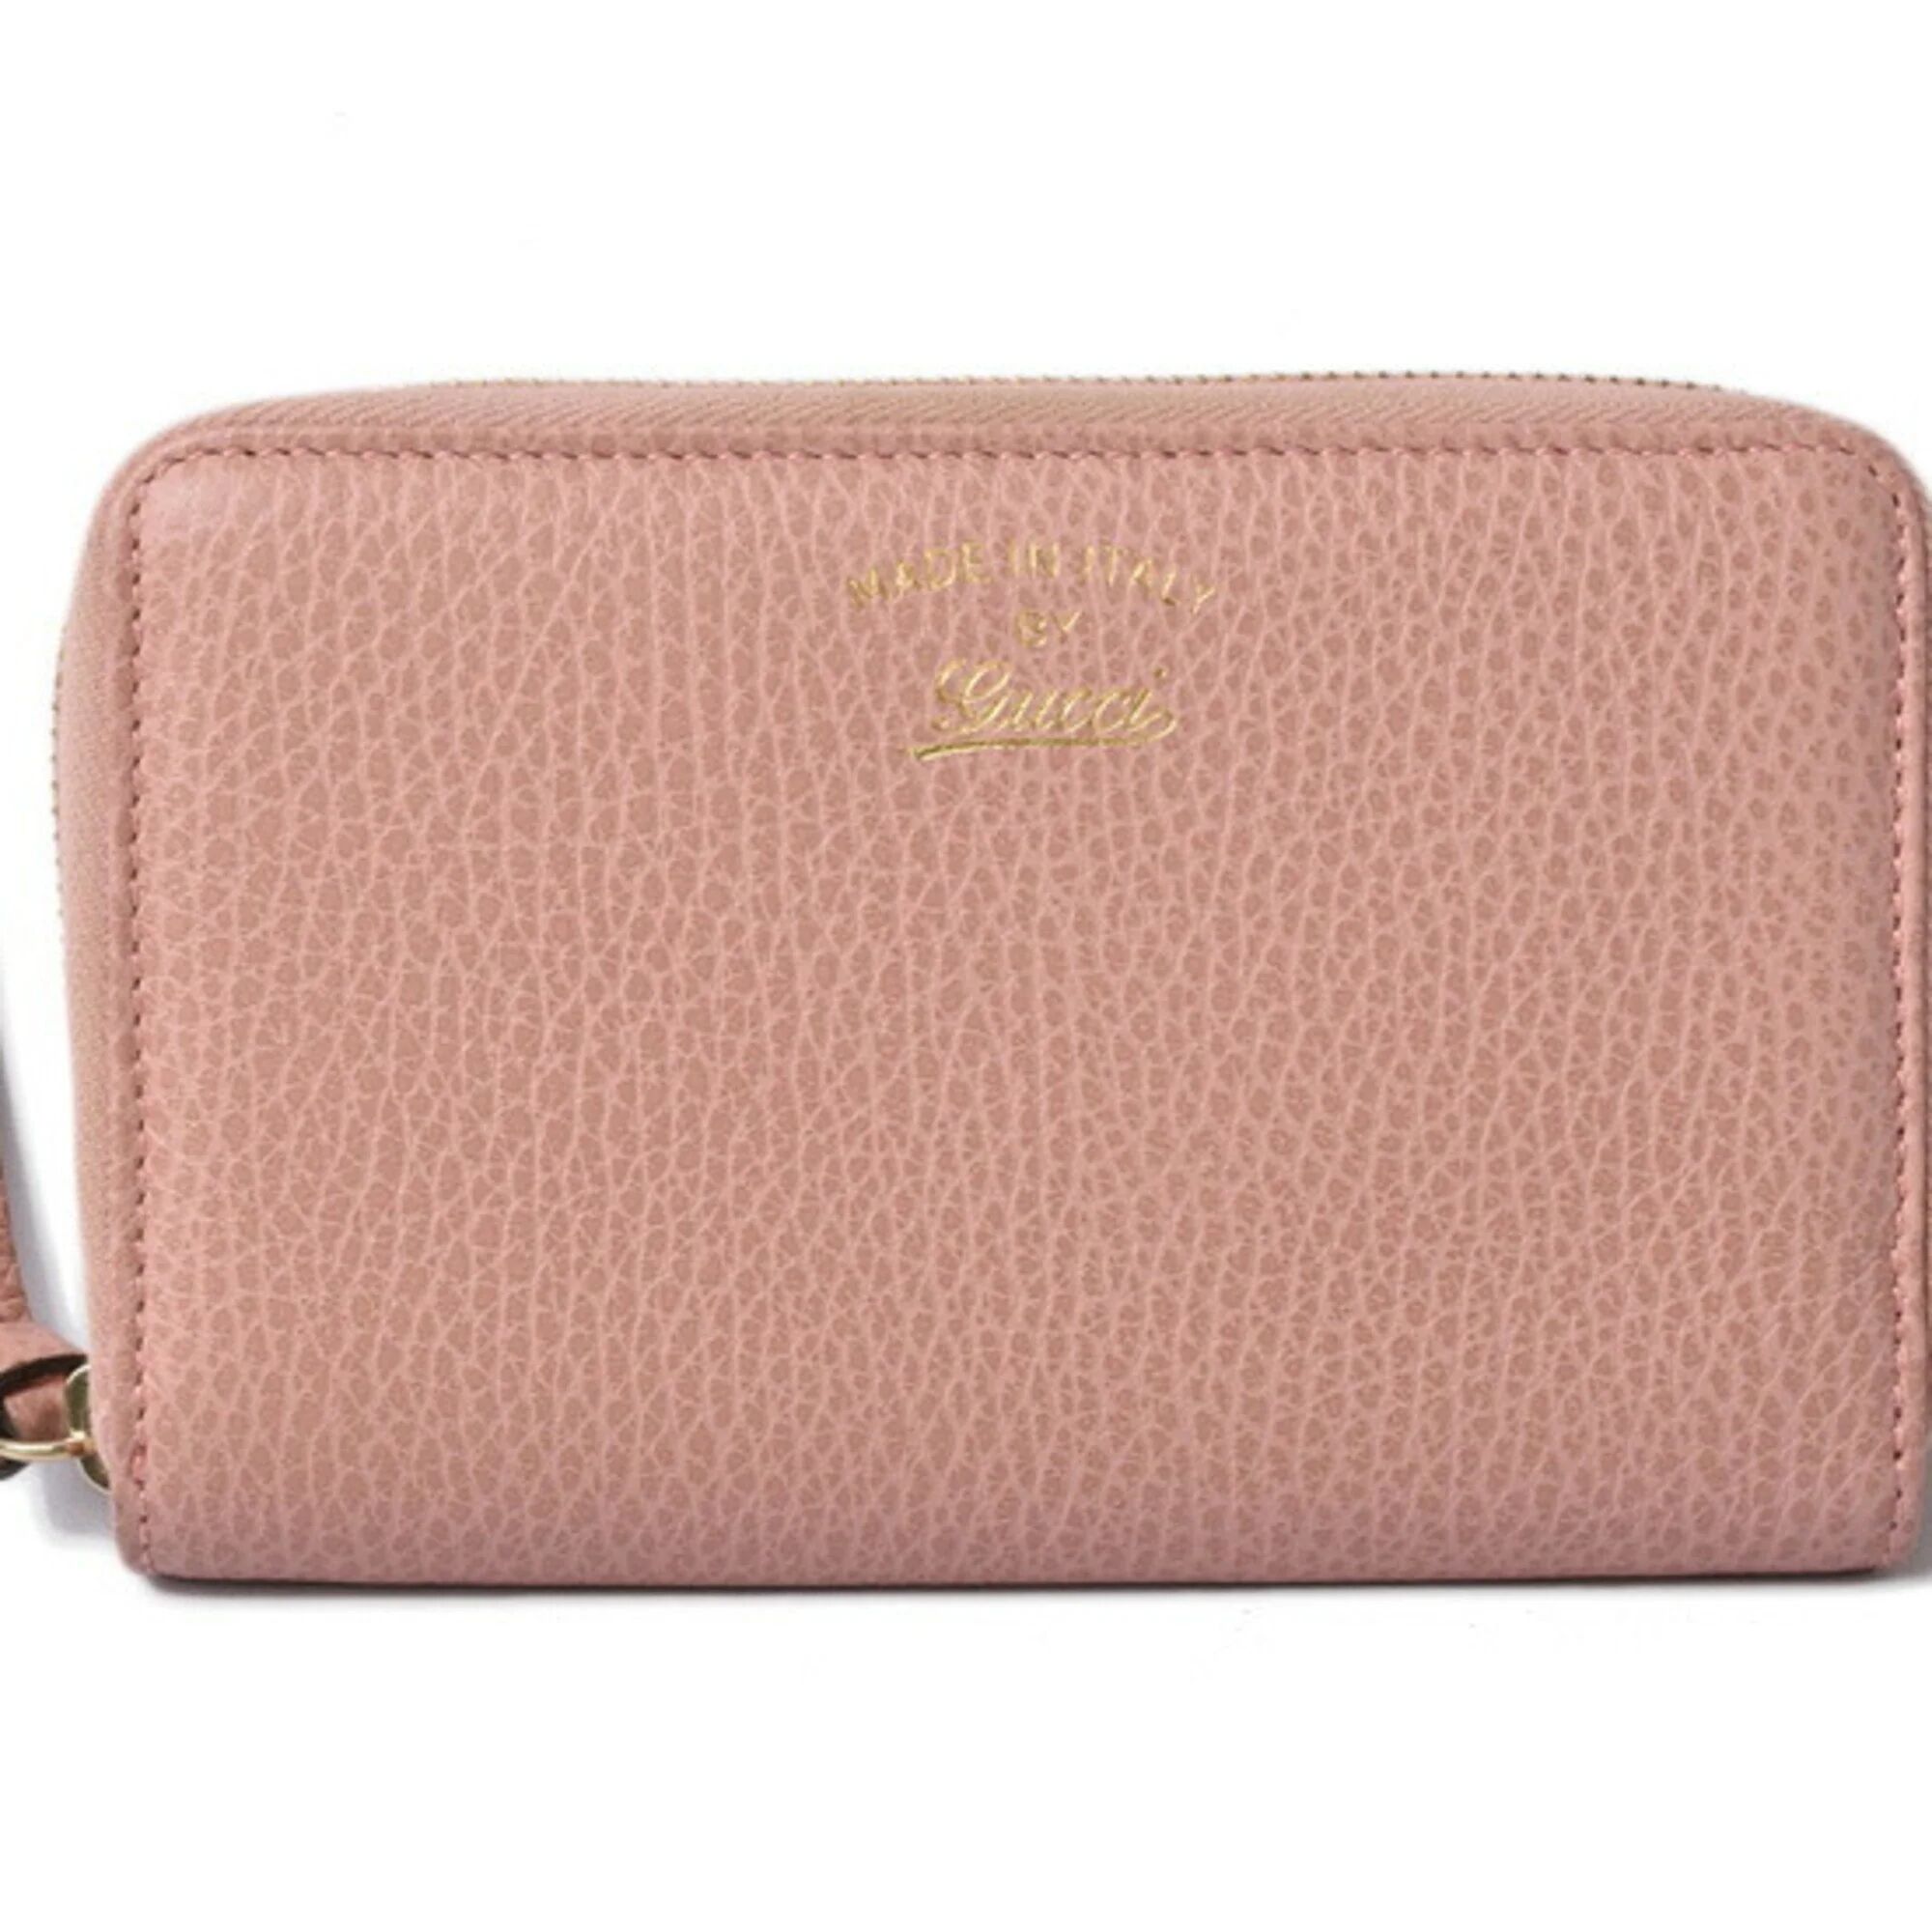 wallet GUCCI folding swing leather light pink 354497